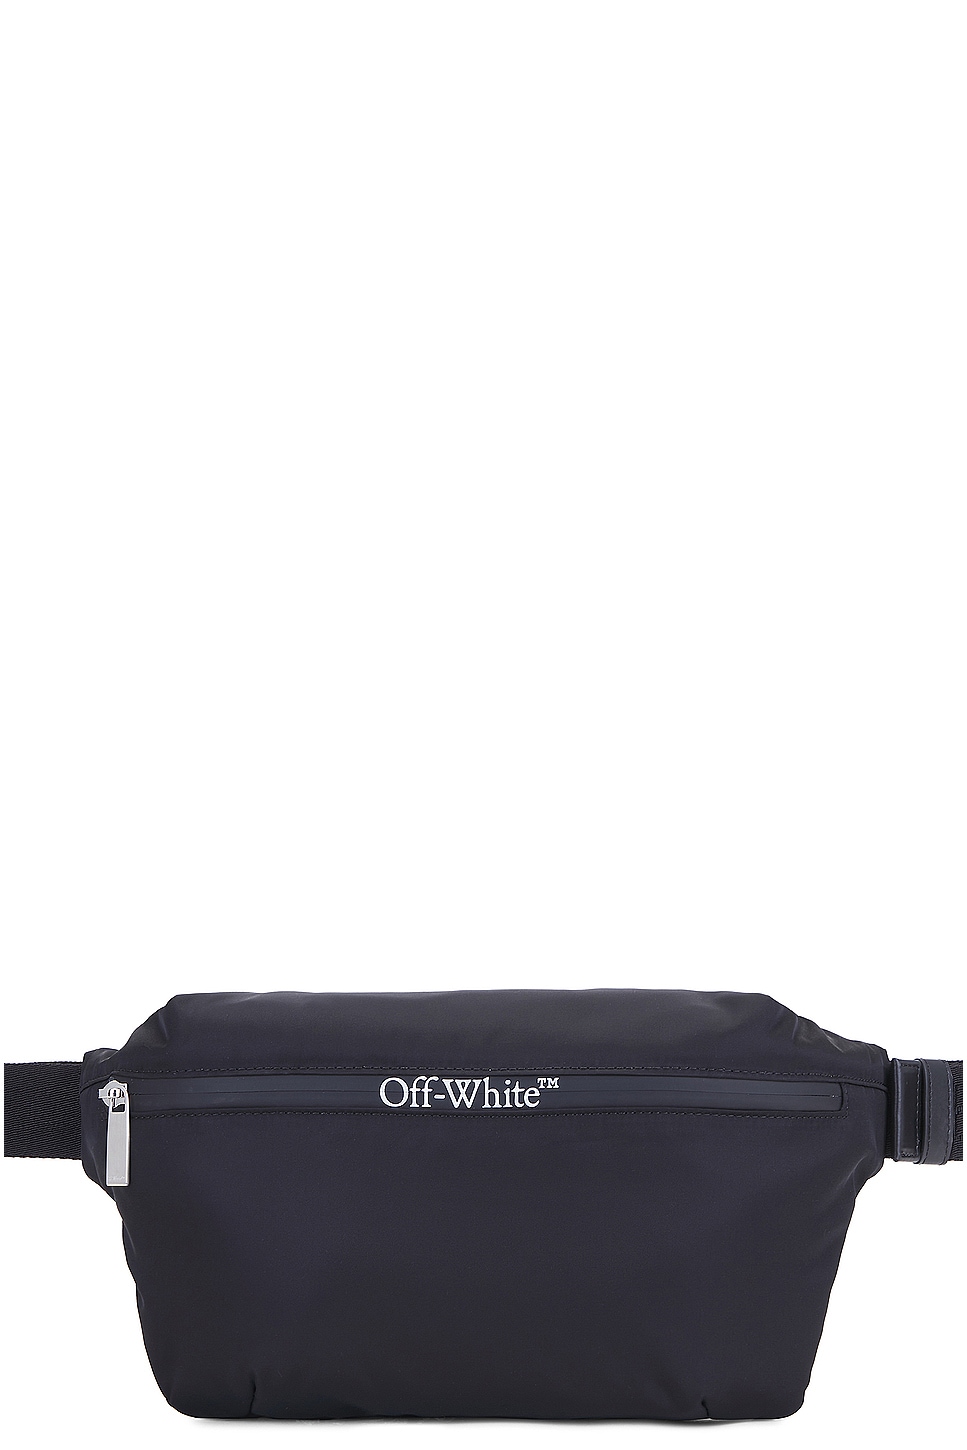 OFF-WHITE Outdoor Waistbag in Black